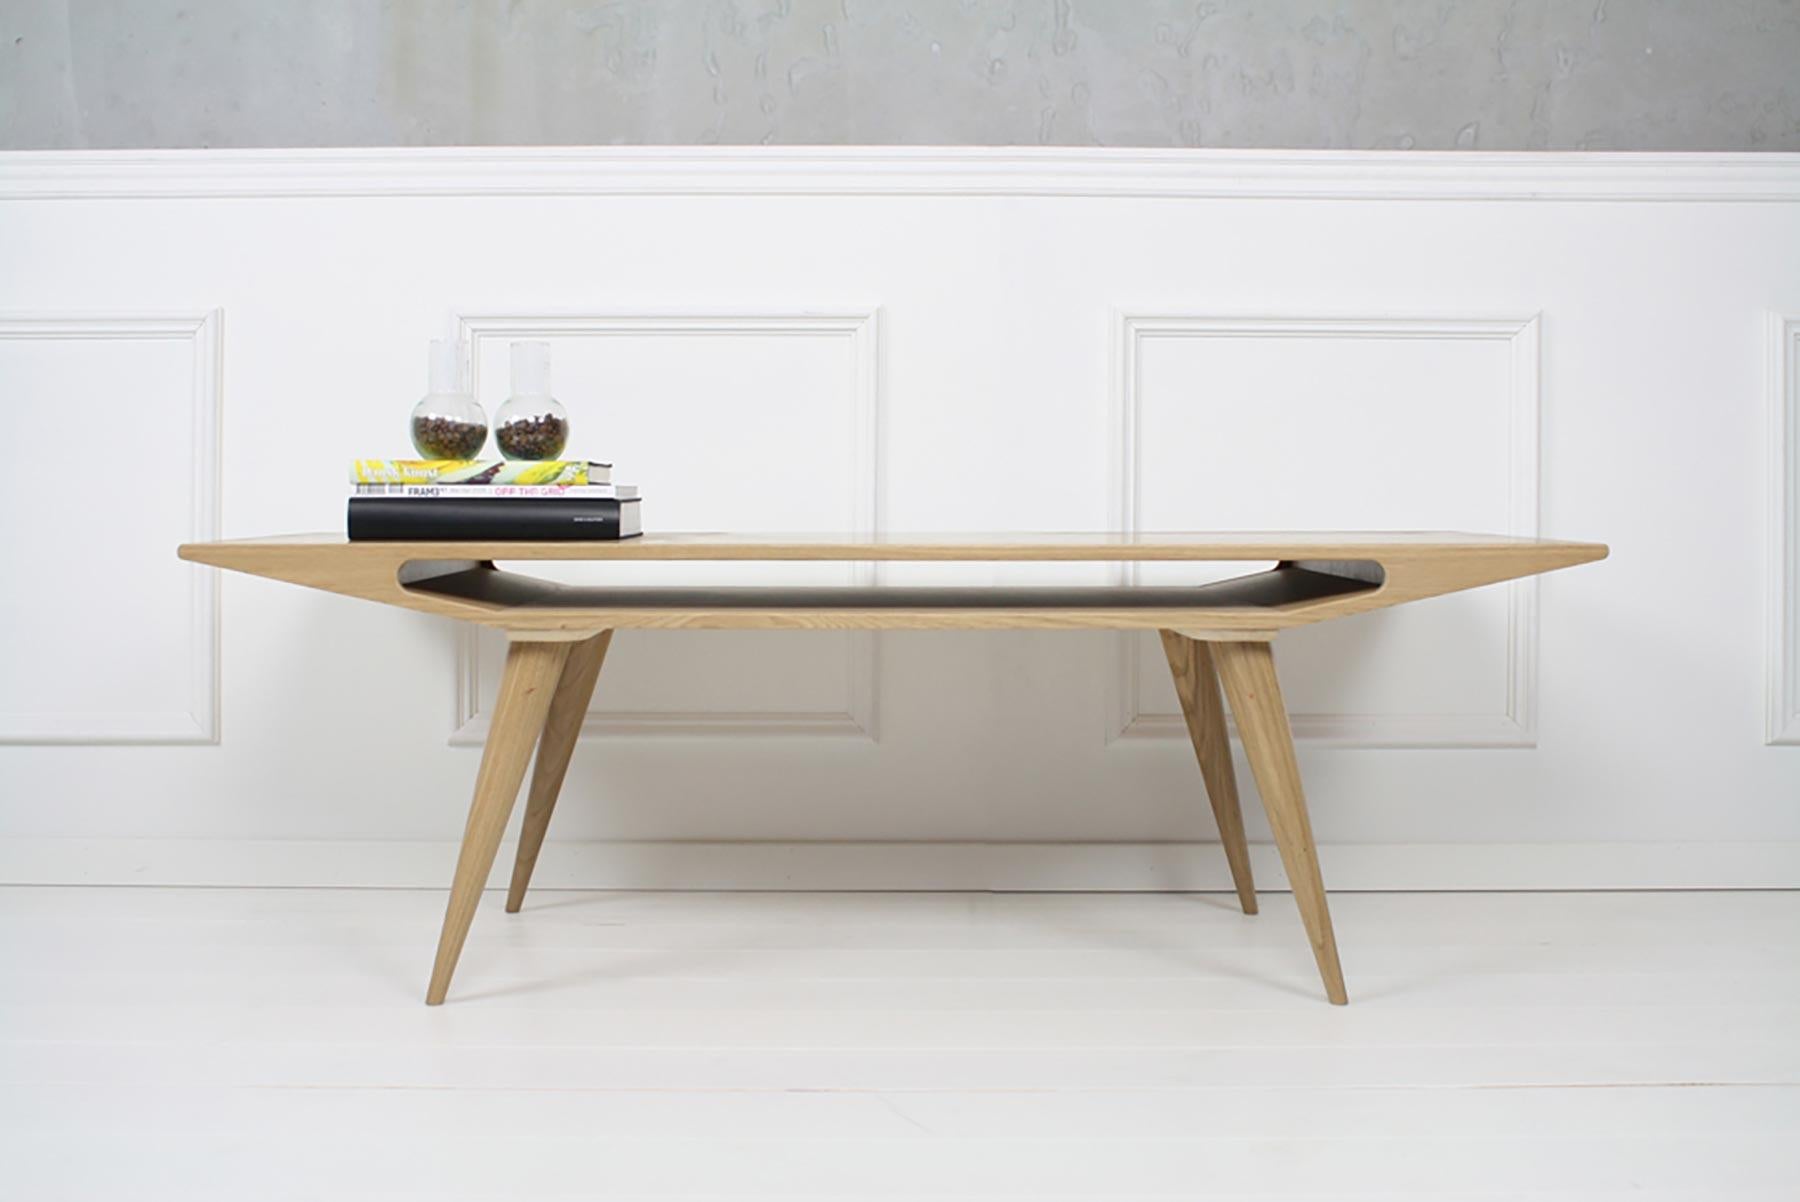 Originally produced between 1953-1970, Omann Jun’s Model 100 coffee table was relaunched in 2016 for a new generation of design enthusiasts to enjoy.

Crafted in oak, the Model 100 offers crisp, angular lines that will fit perfectly in any modern